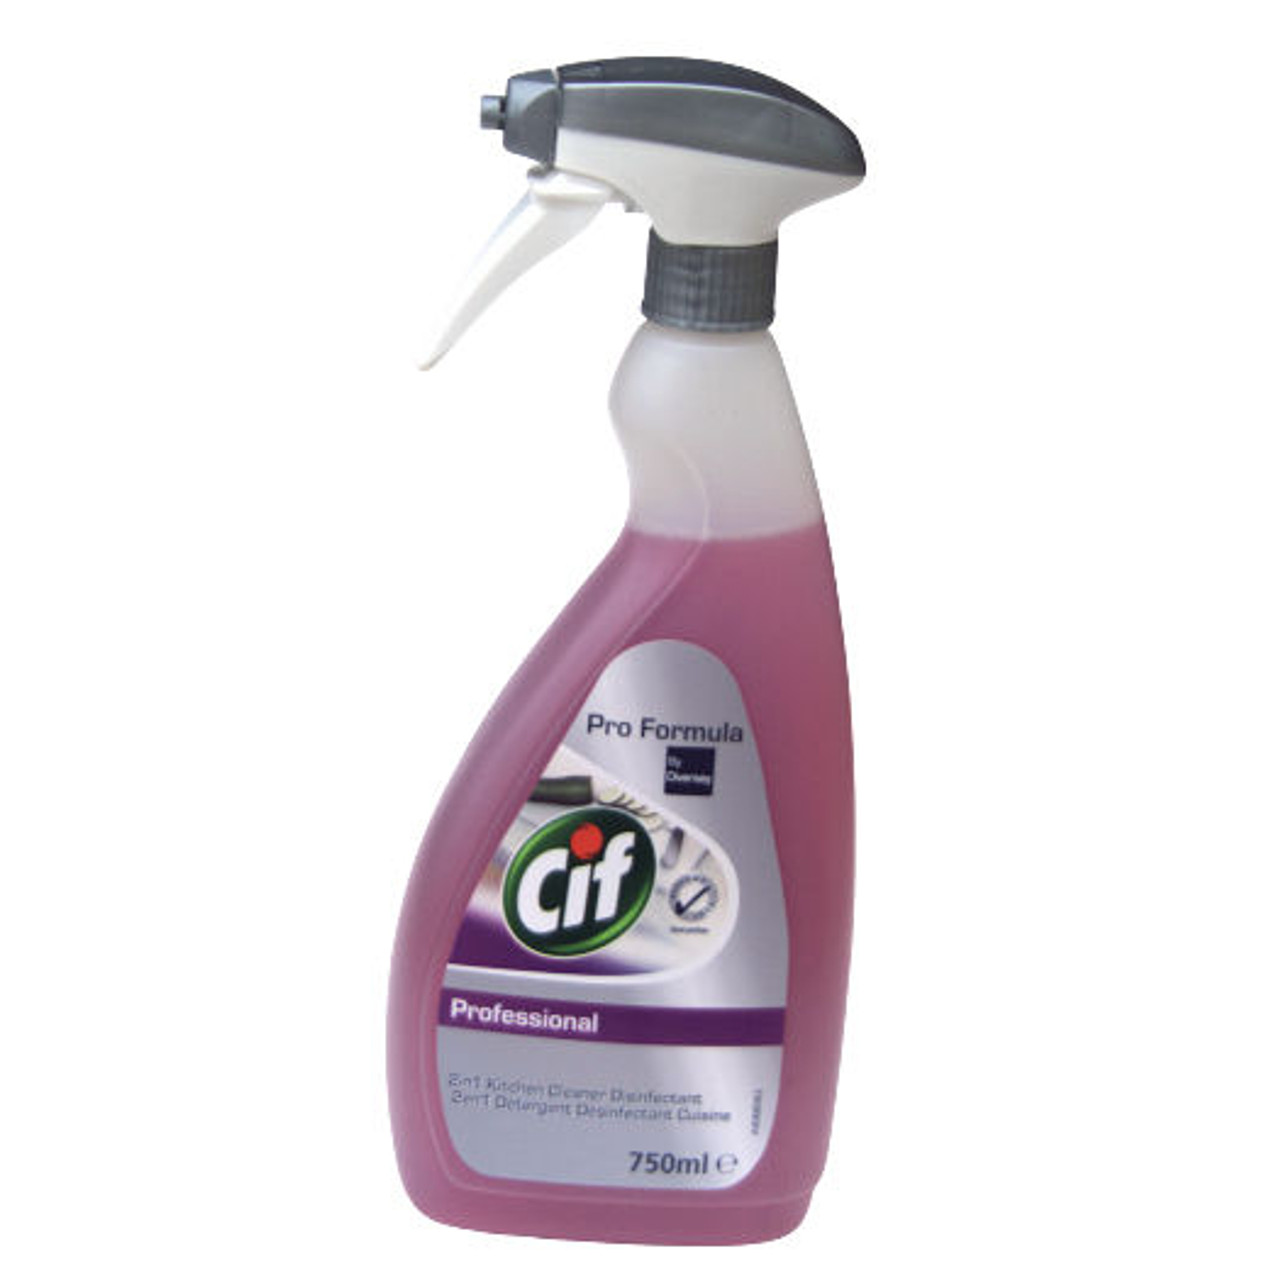 Cif Professional 2in1 Kitchen Cleaner Disinfectant Kills 99,99% of Bacteria750ml